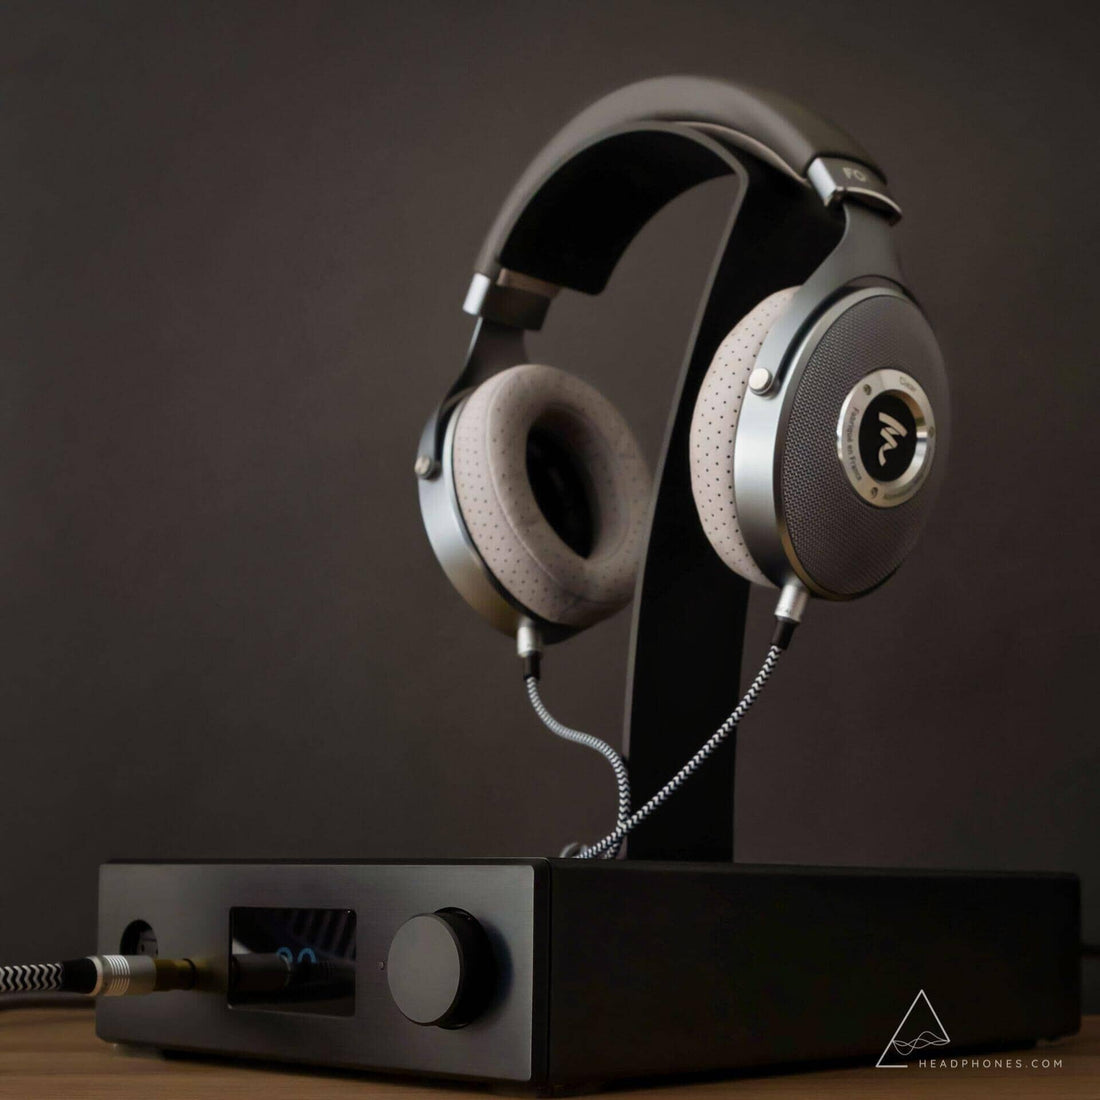 Get $1000 Off the Focal Arche